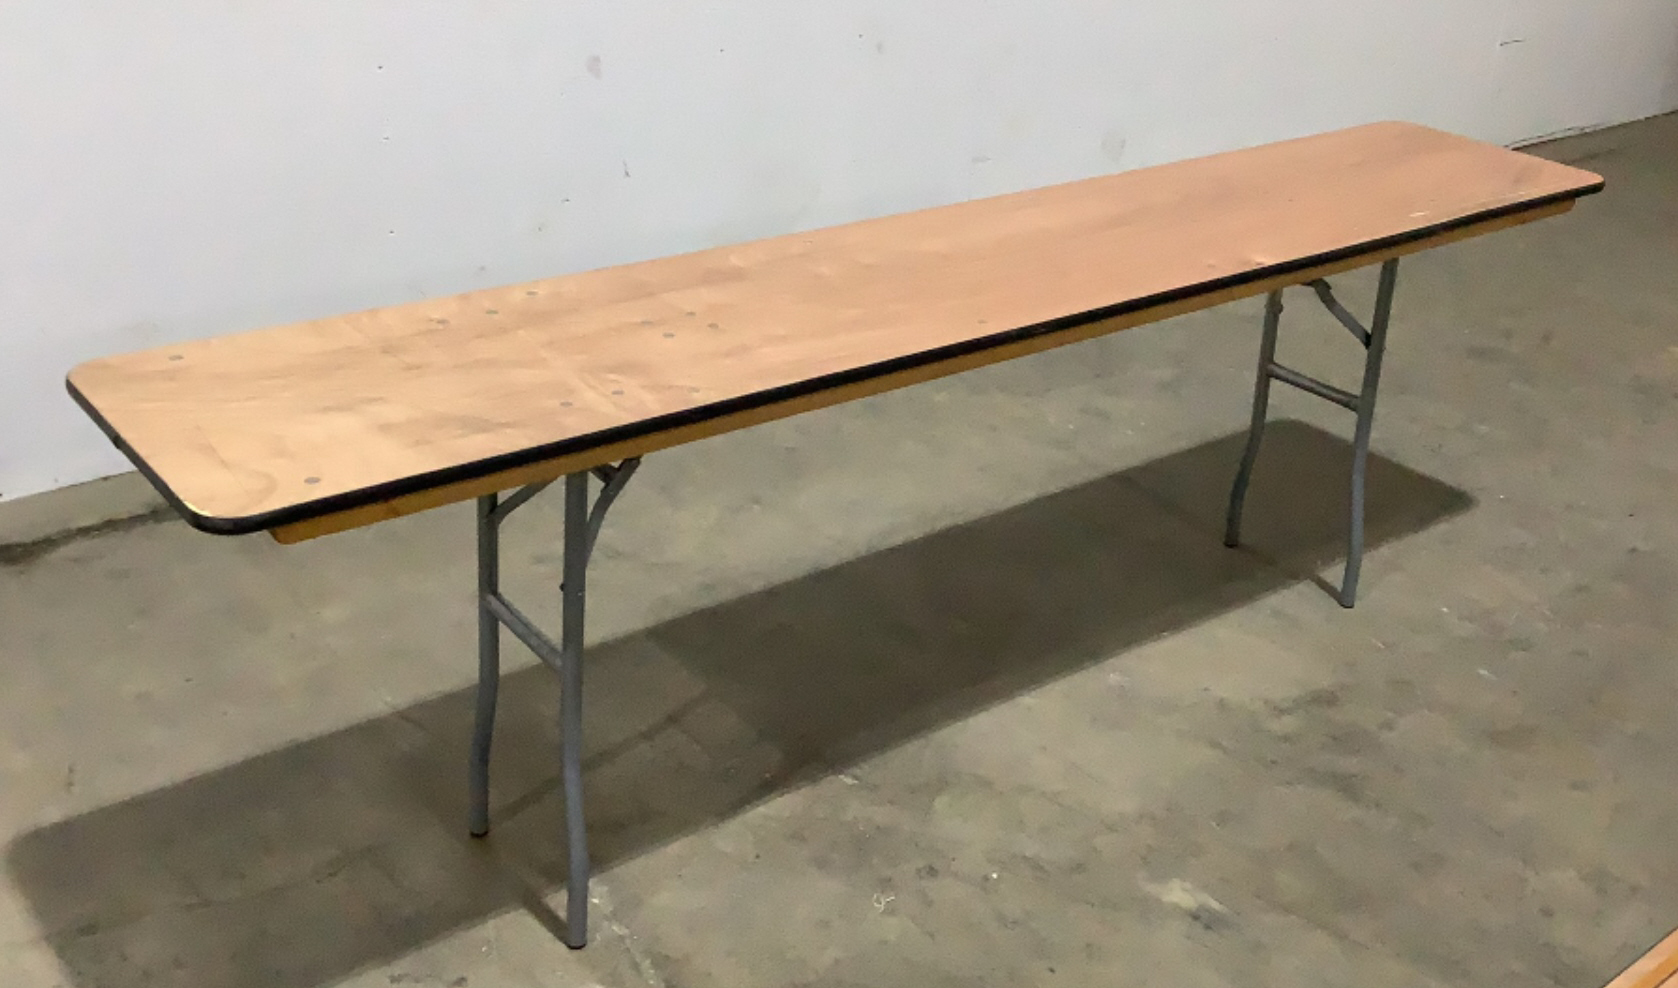 8' x 18' Long Rectangle Folding Event Tables (qty - 5)